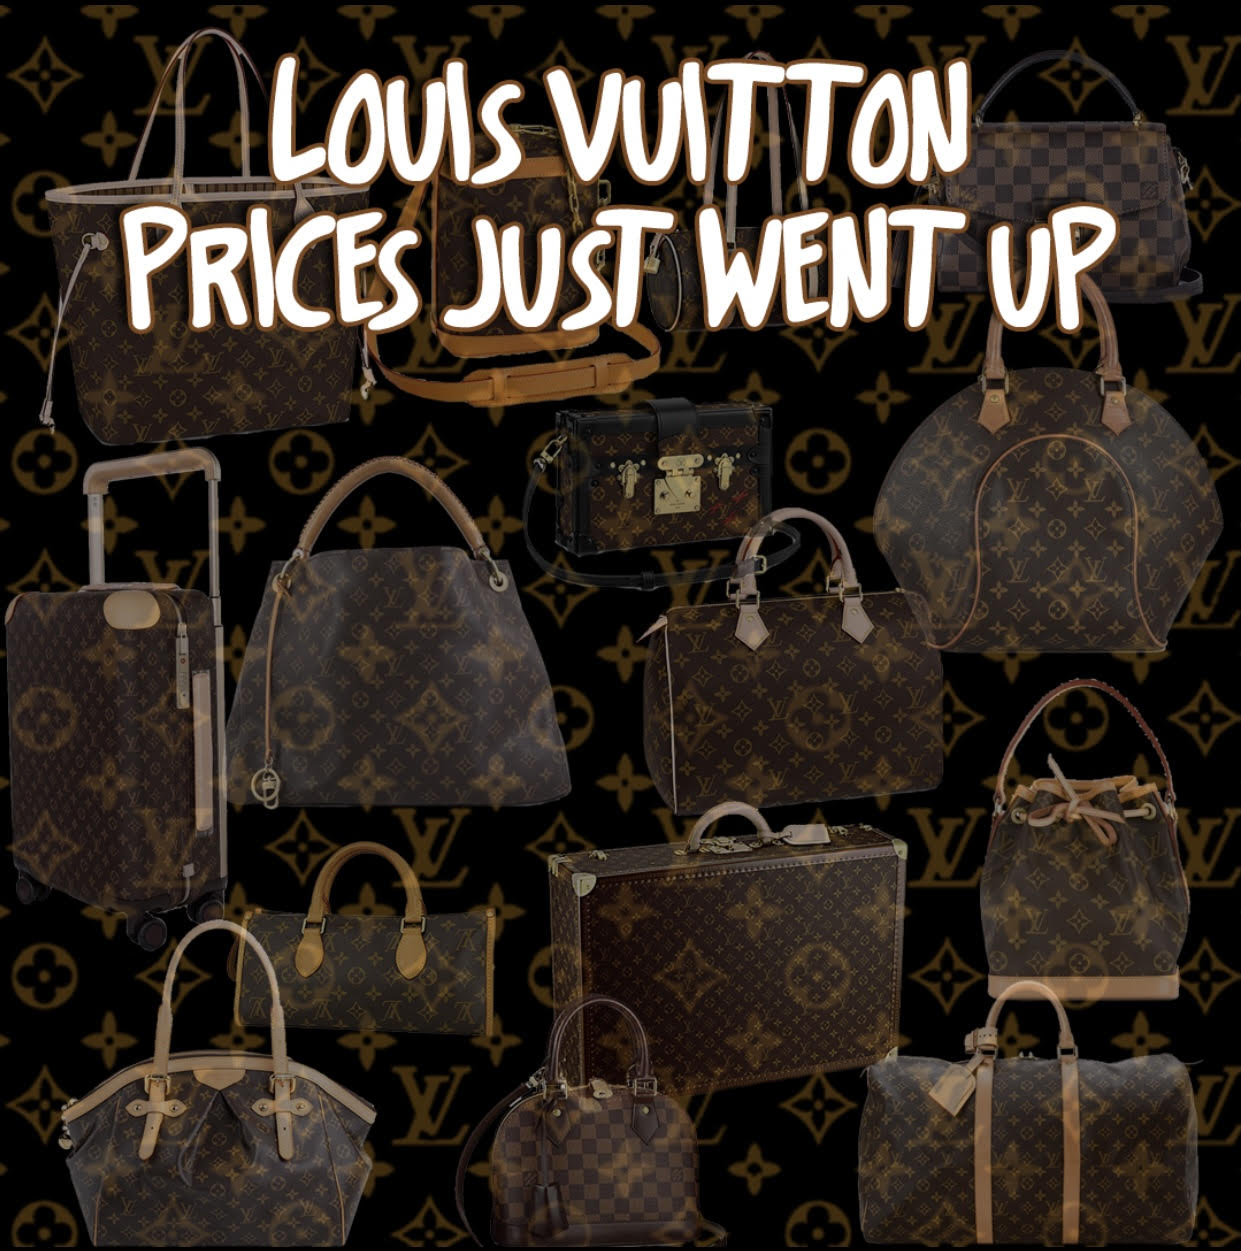 NEW Louis Vuitton Bags 2021 😮 WILL YOU BE BUYING? RESULTS! 